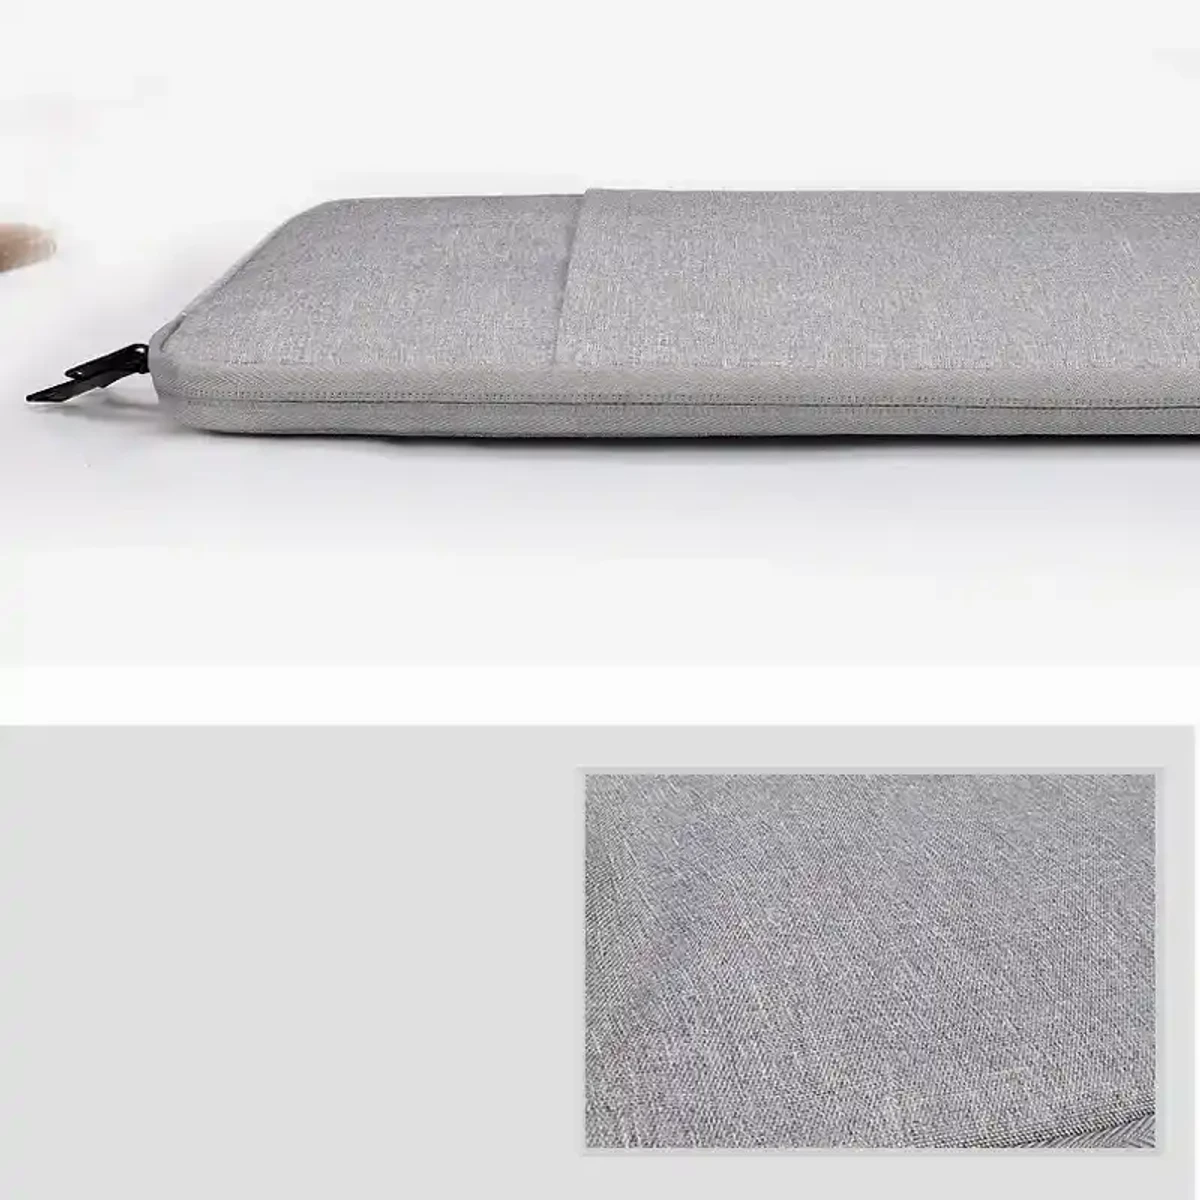 Sleeve case for laptop up to 15'4 inches bag